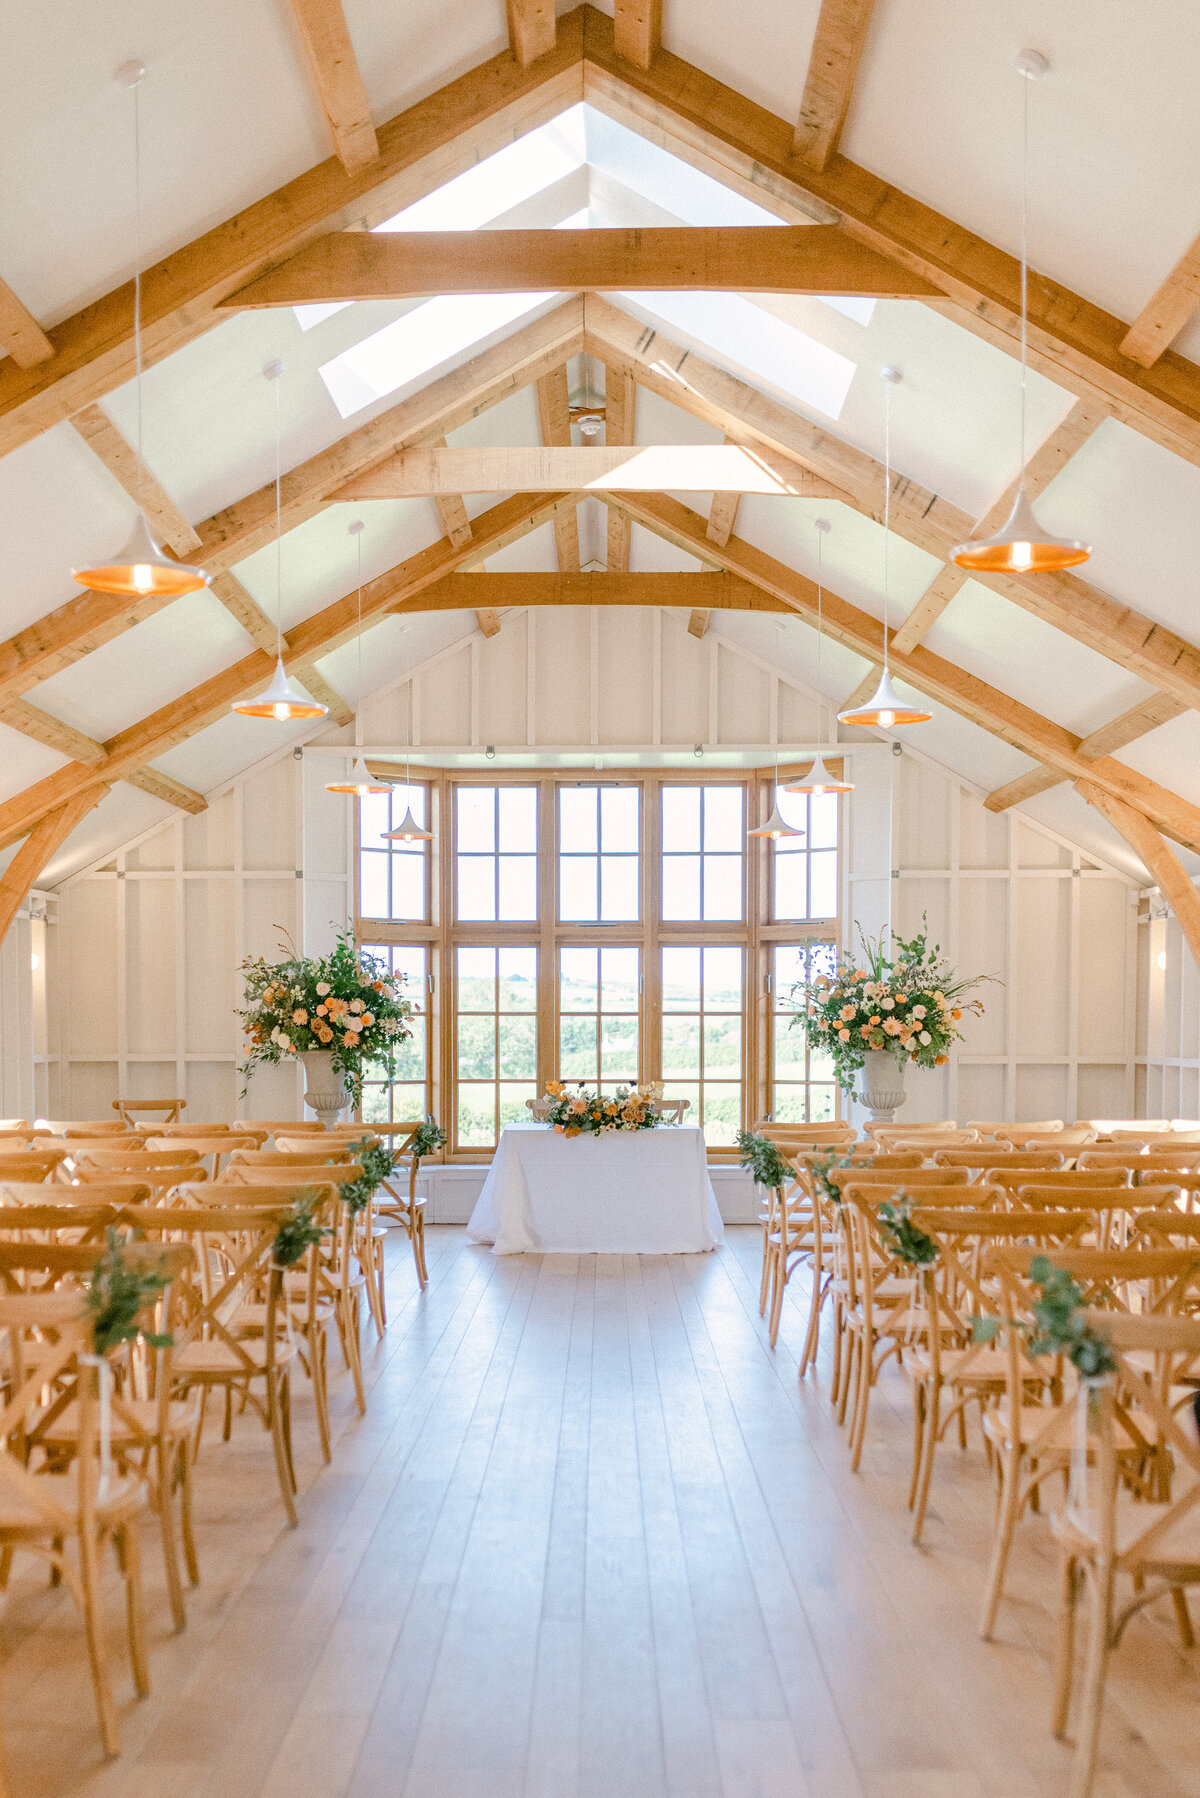 Image of the ceremony room at Hyde House wedding Venue in the cotswold